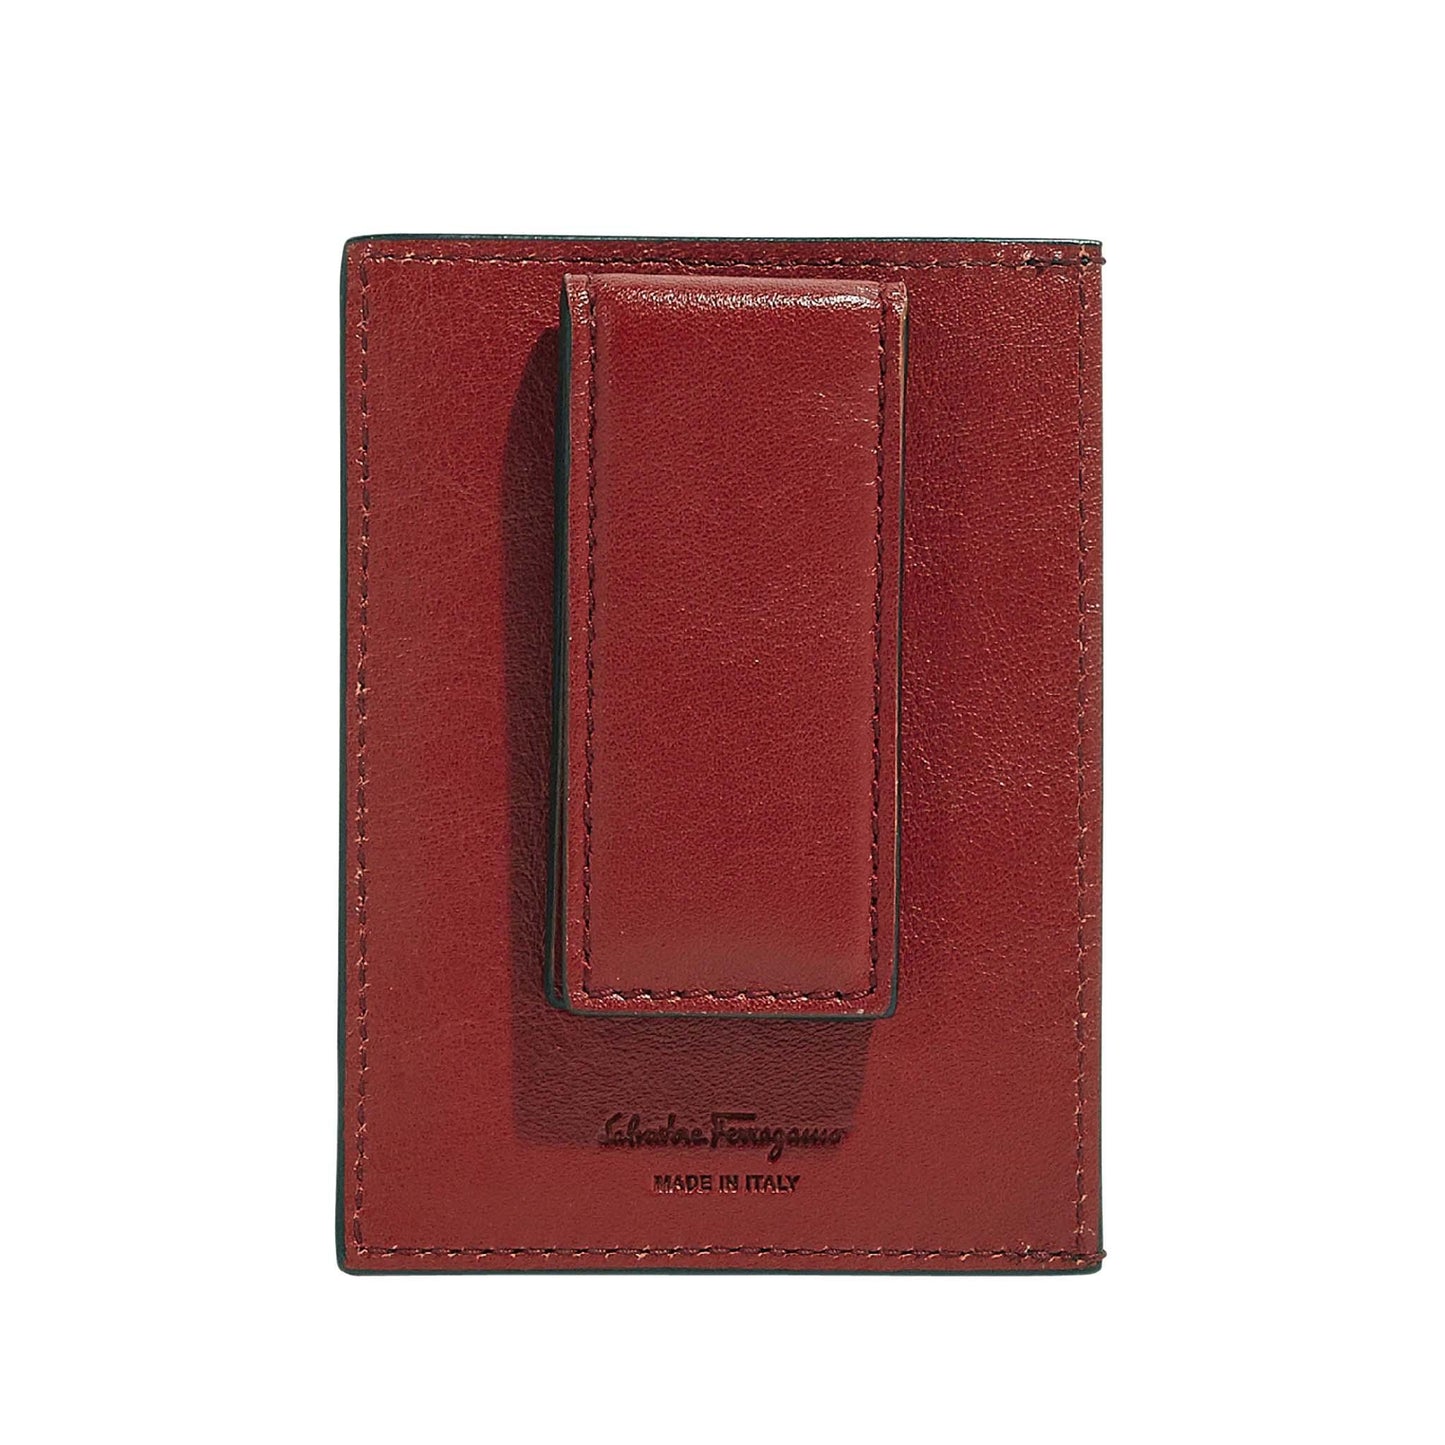 Gancini Credit Card Holder - Cosmos Boutique New Jersey